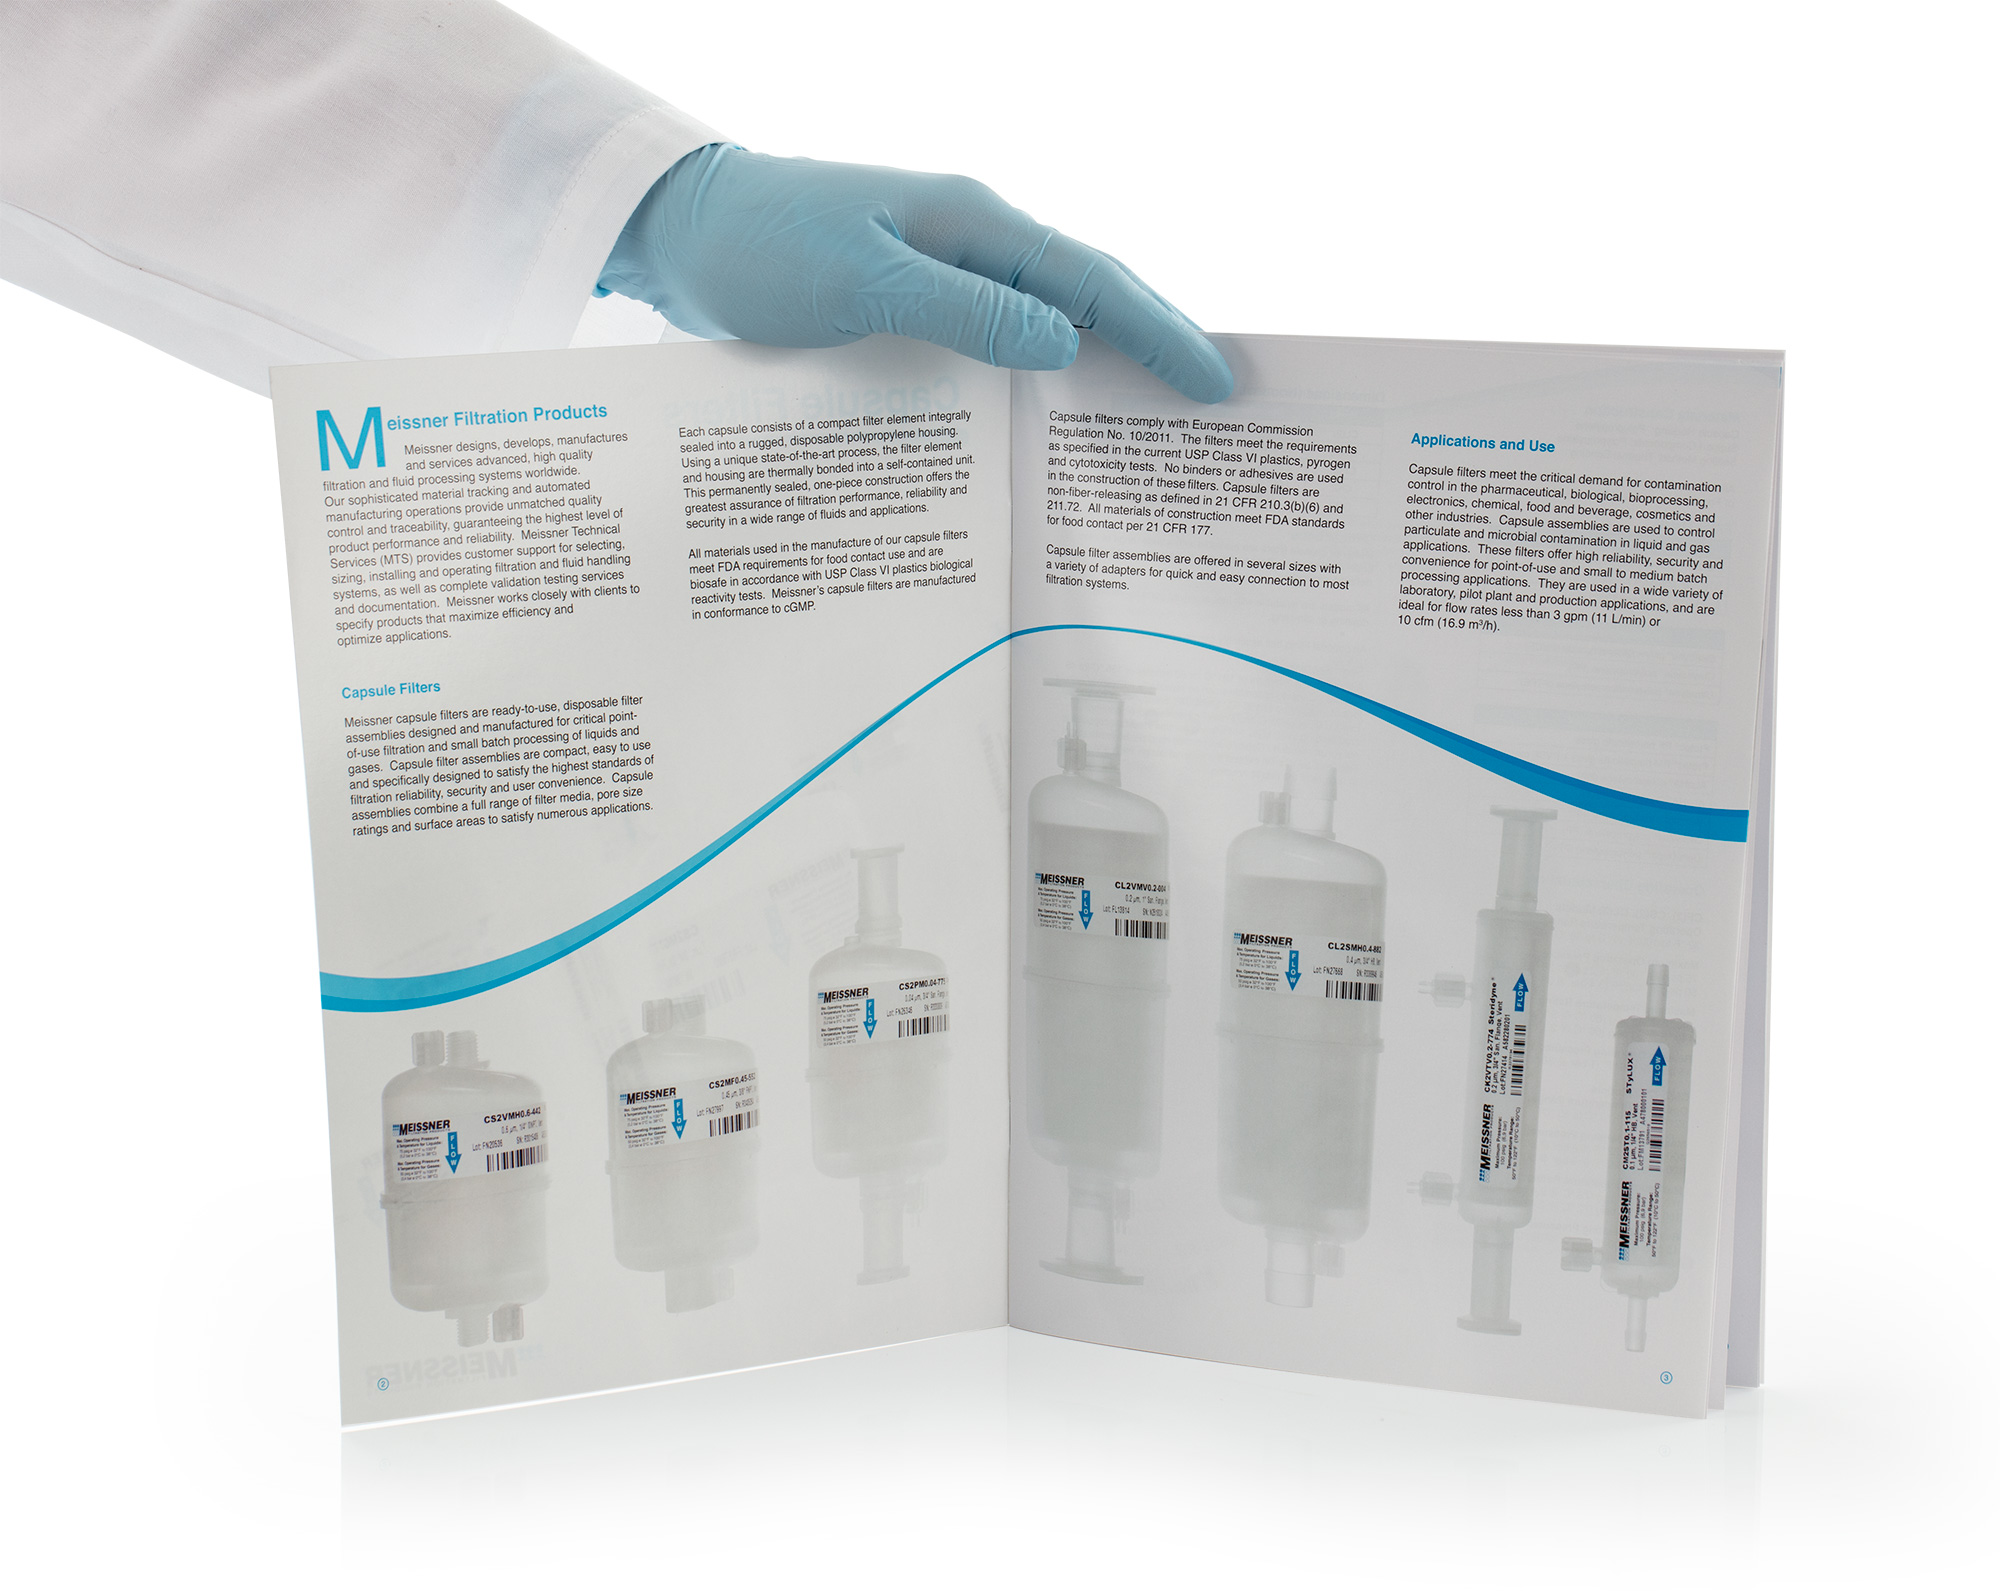 The brochure highlights advantages of each capsule filter and lists typical manufacturing applications.